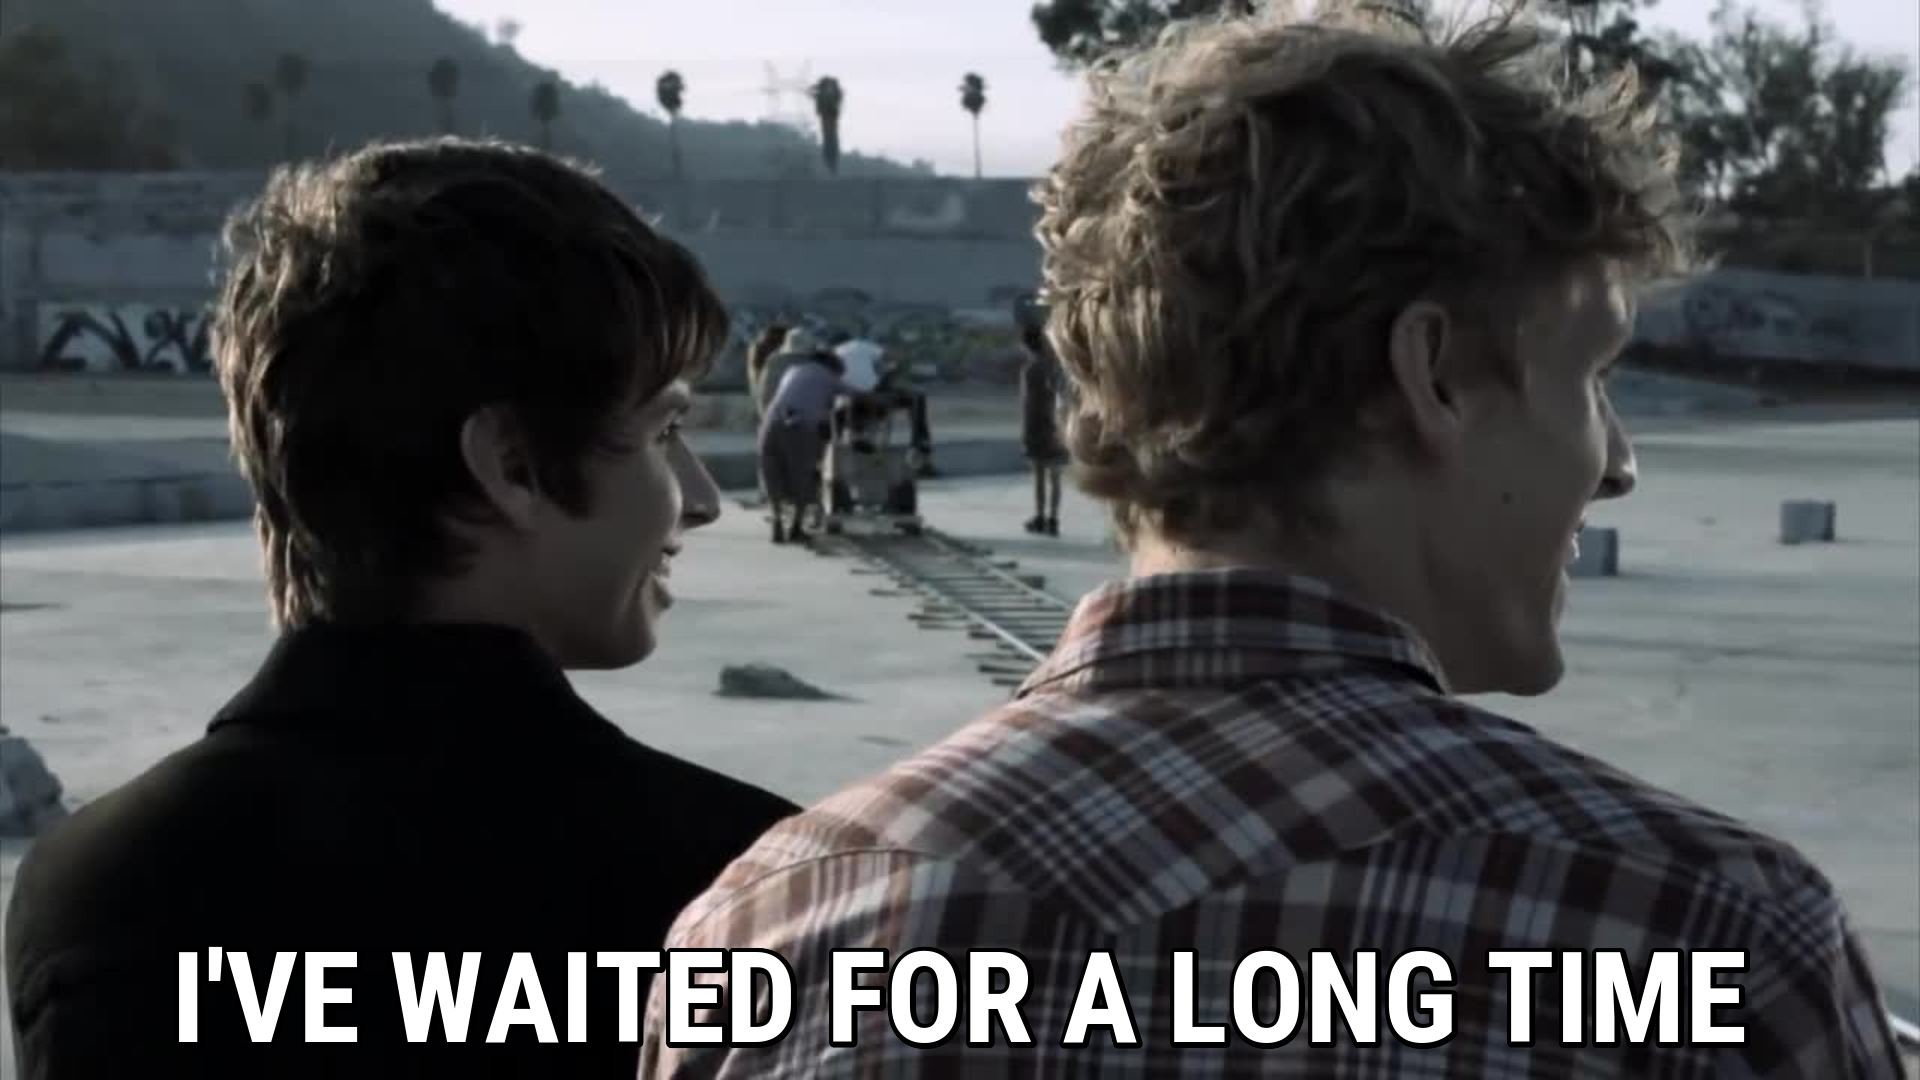 1920x1080 I've waited for a long time / Foster the People